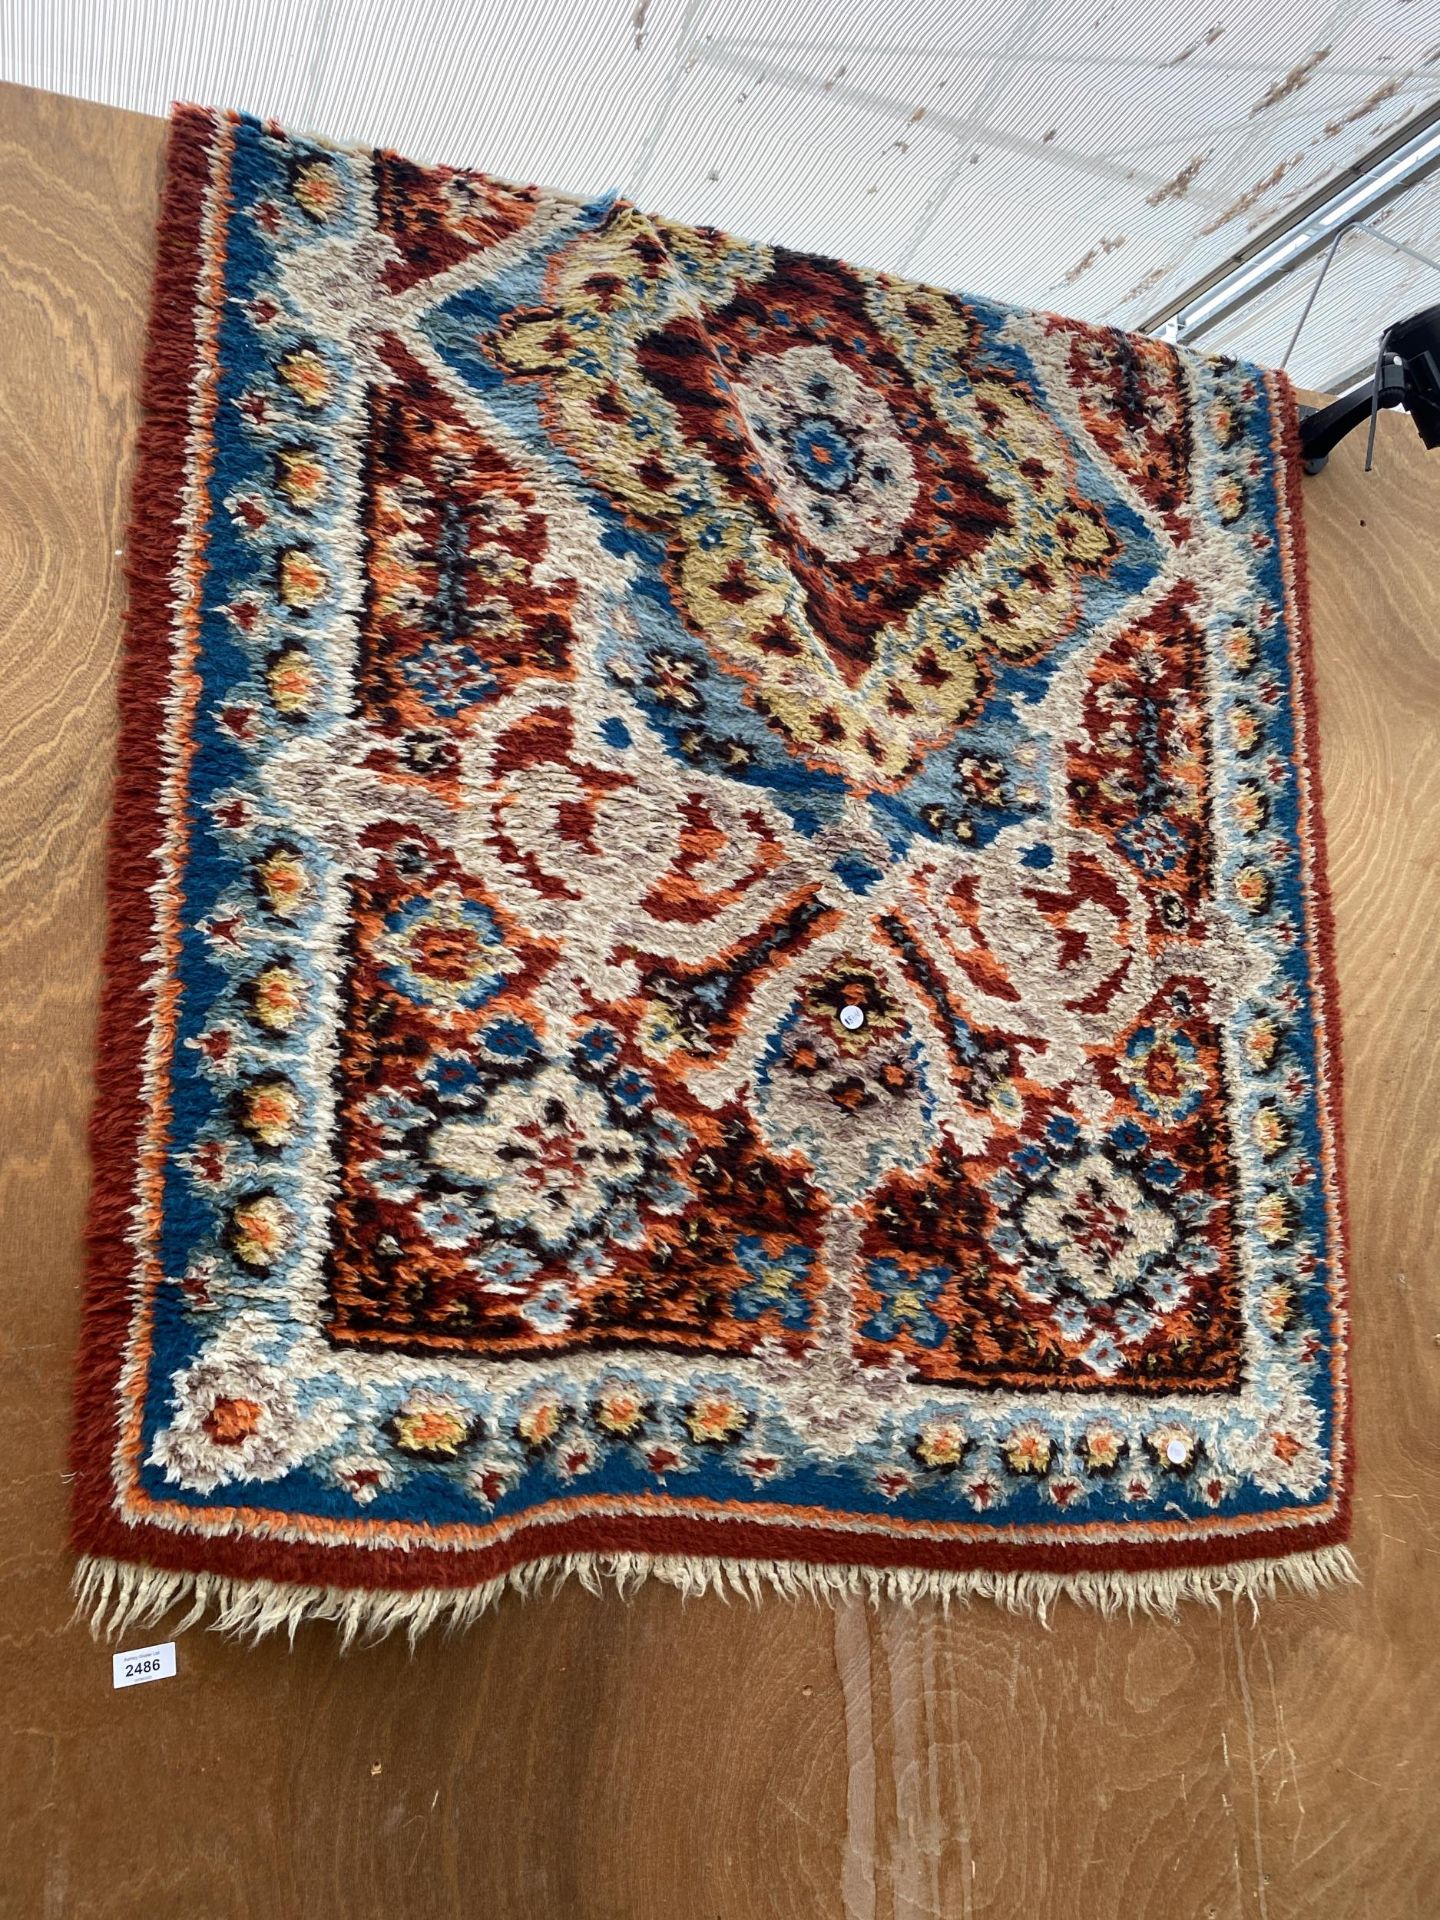 A MULTI COULOURED PATTERNED FRINGED RUG